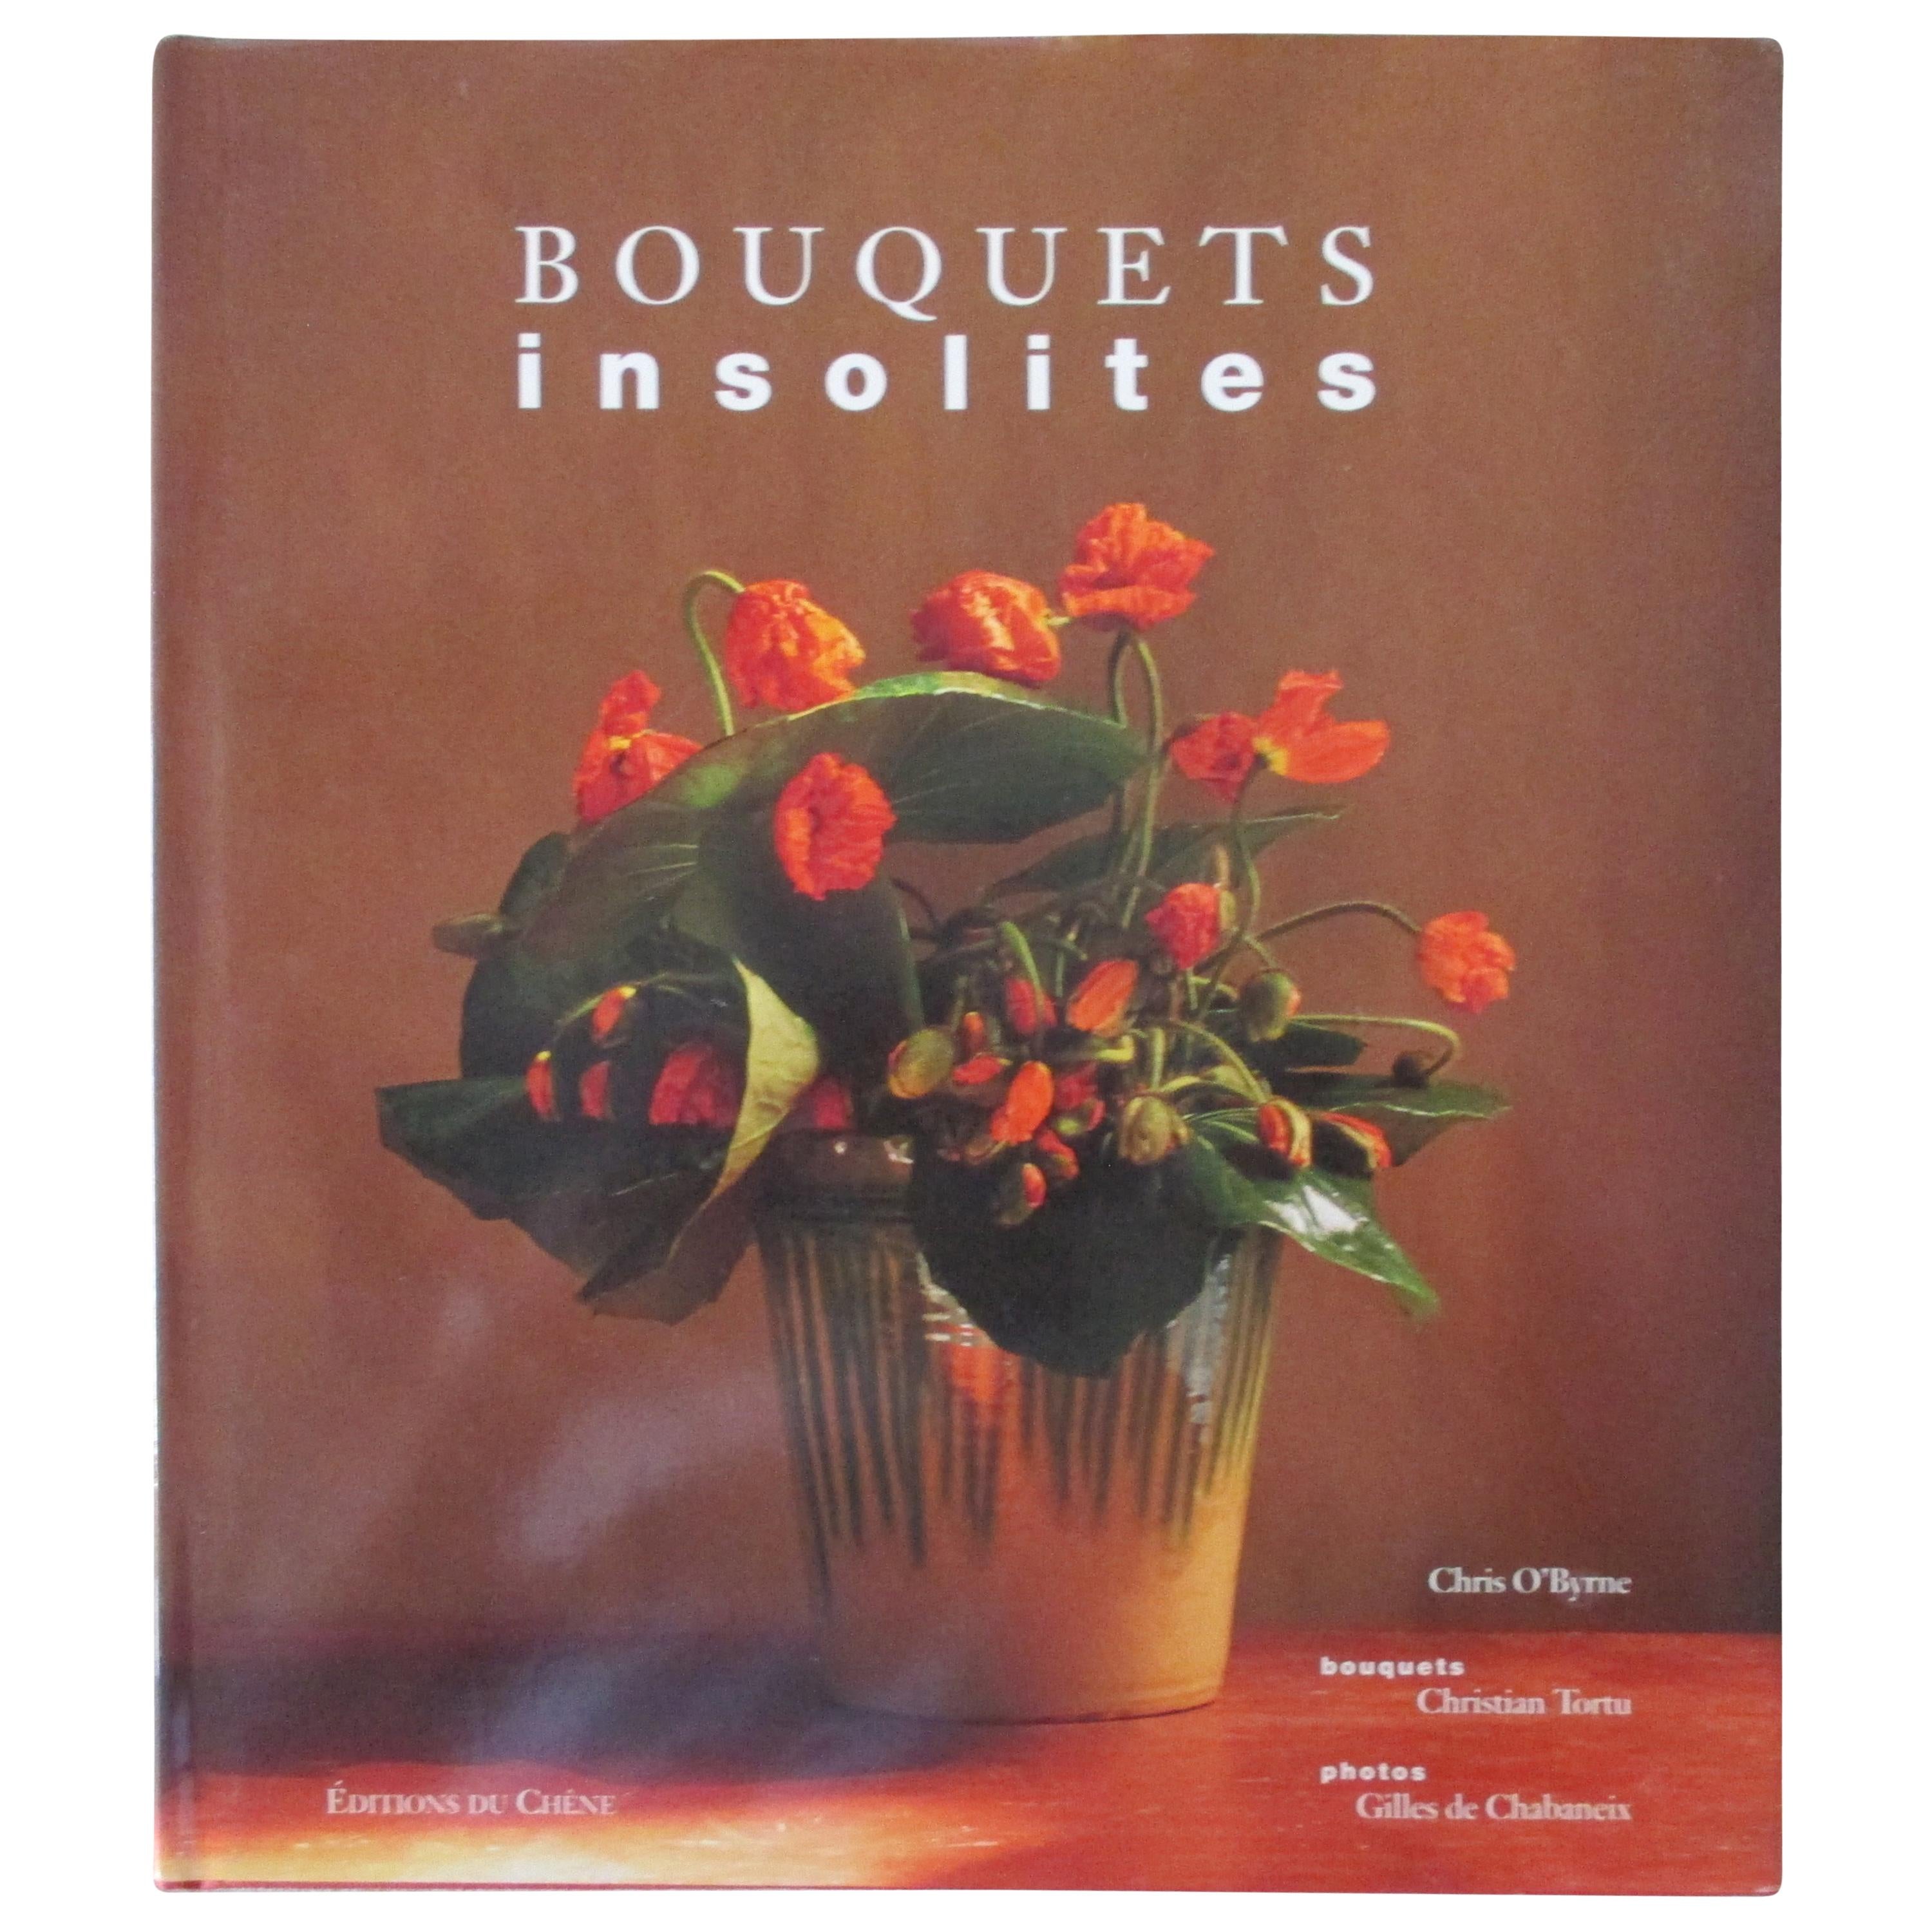 Bouquets Insolites Hardcover Book French For Sale